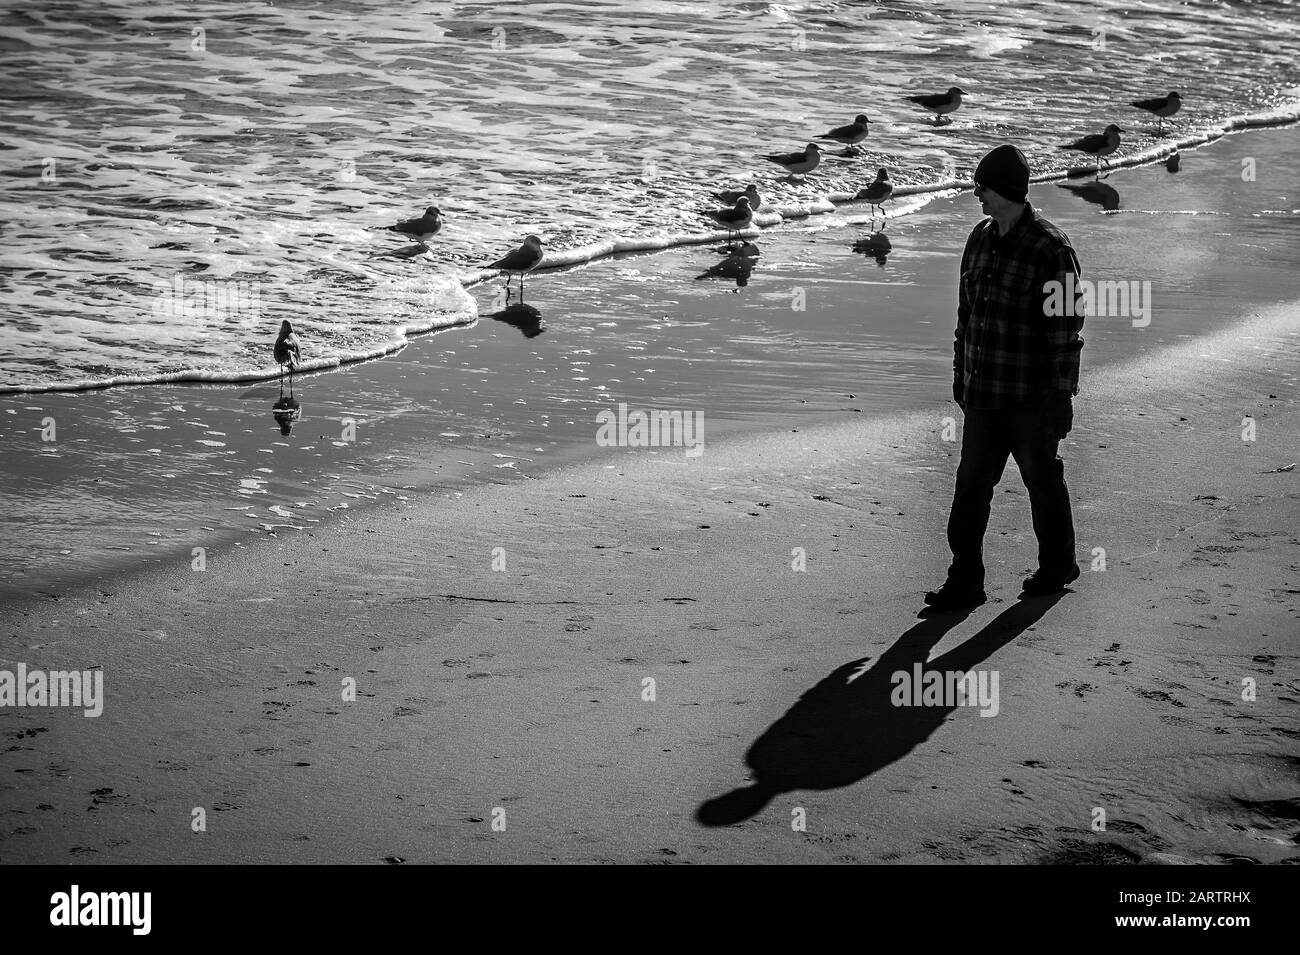 A man takes his early walk on a very cold and windy beach. The wind makes the cold air even colder. But the Sea Gulls, do not seem to be cold at all. Stock Photo